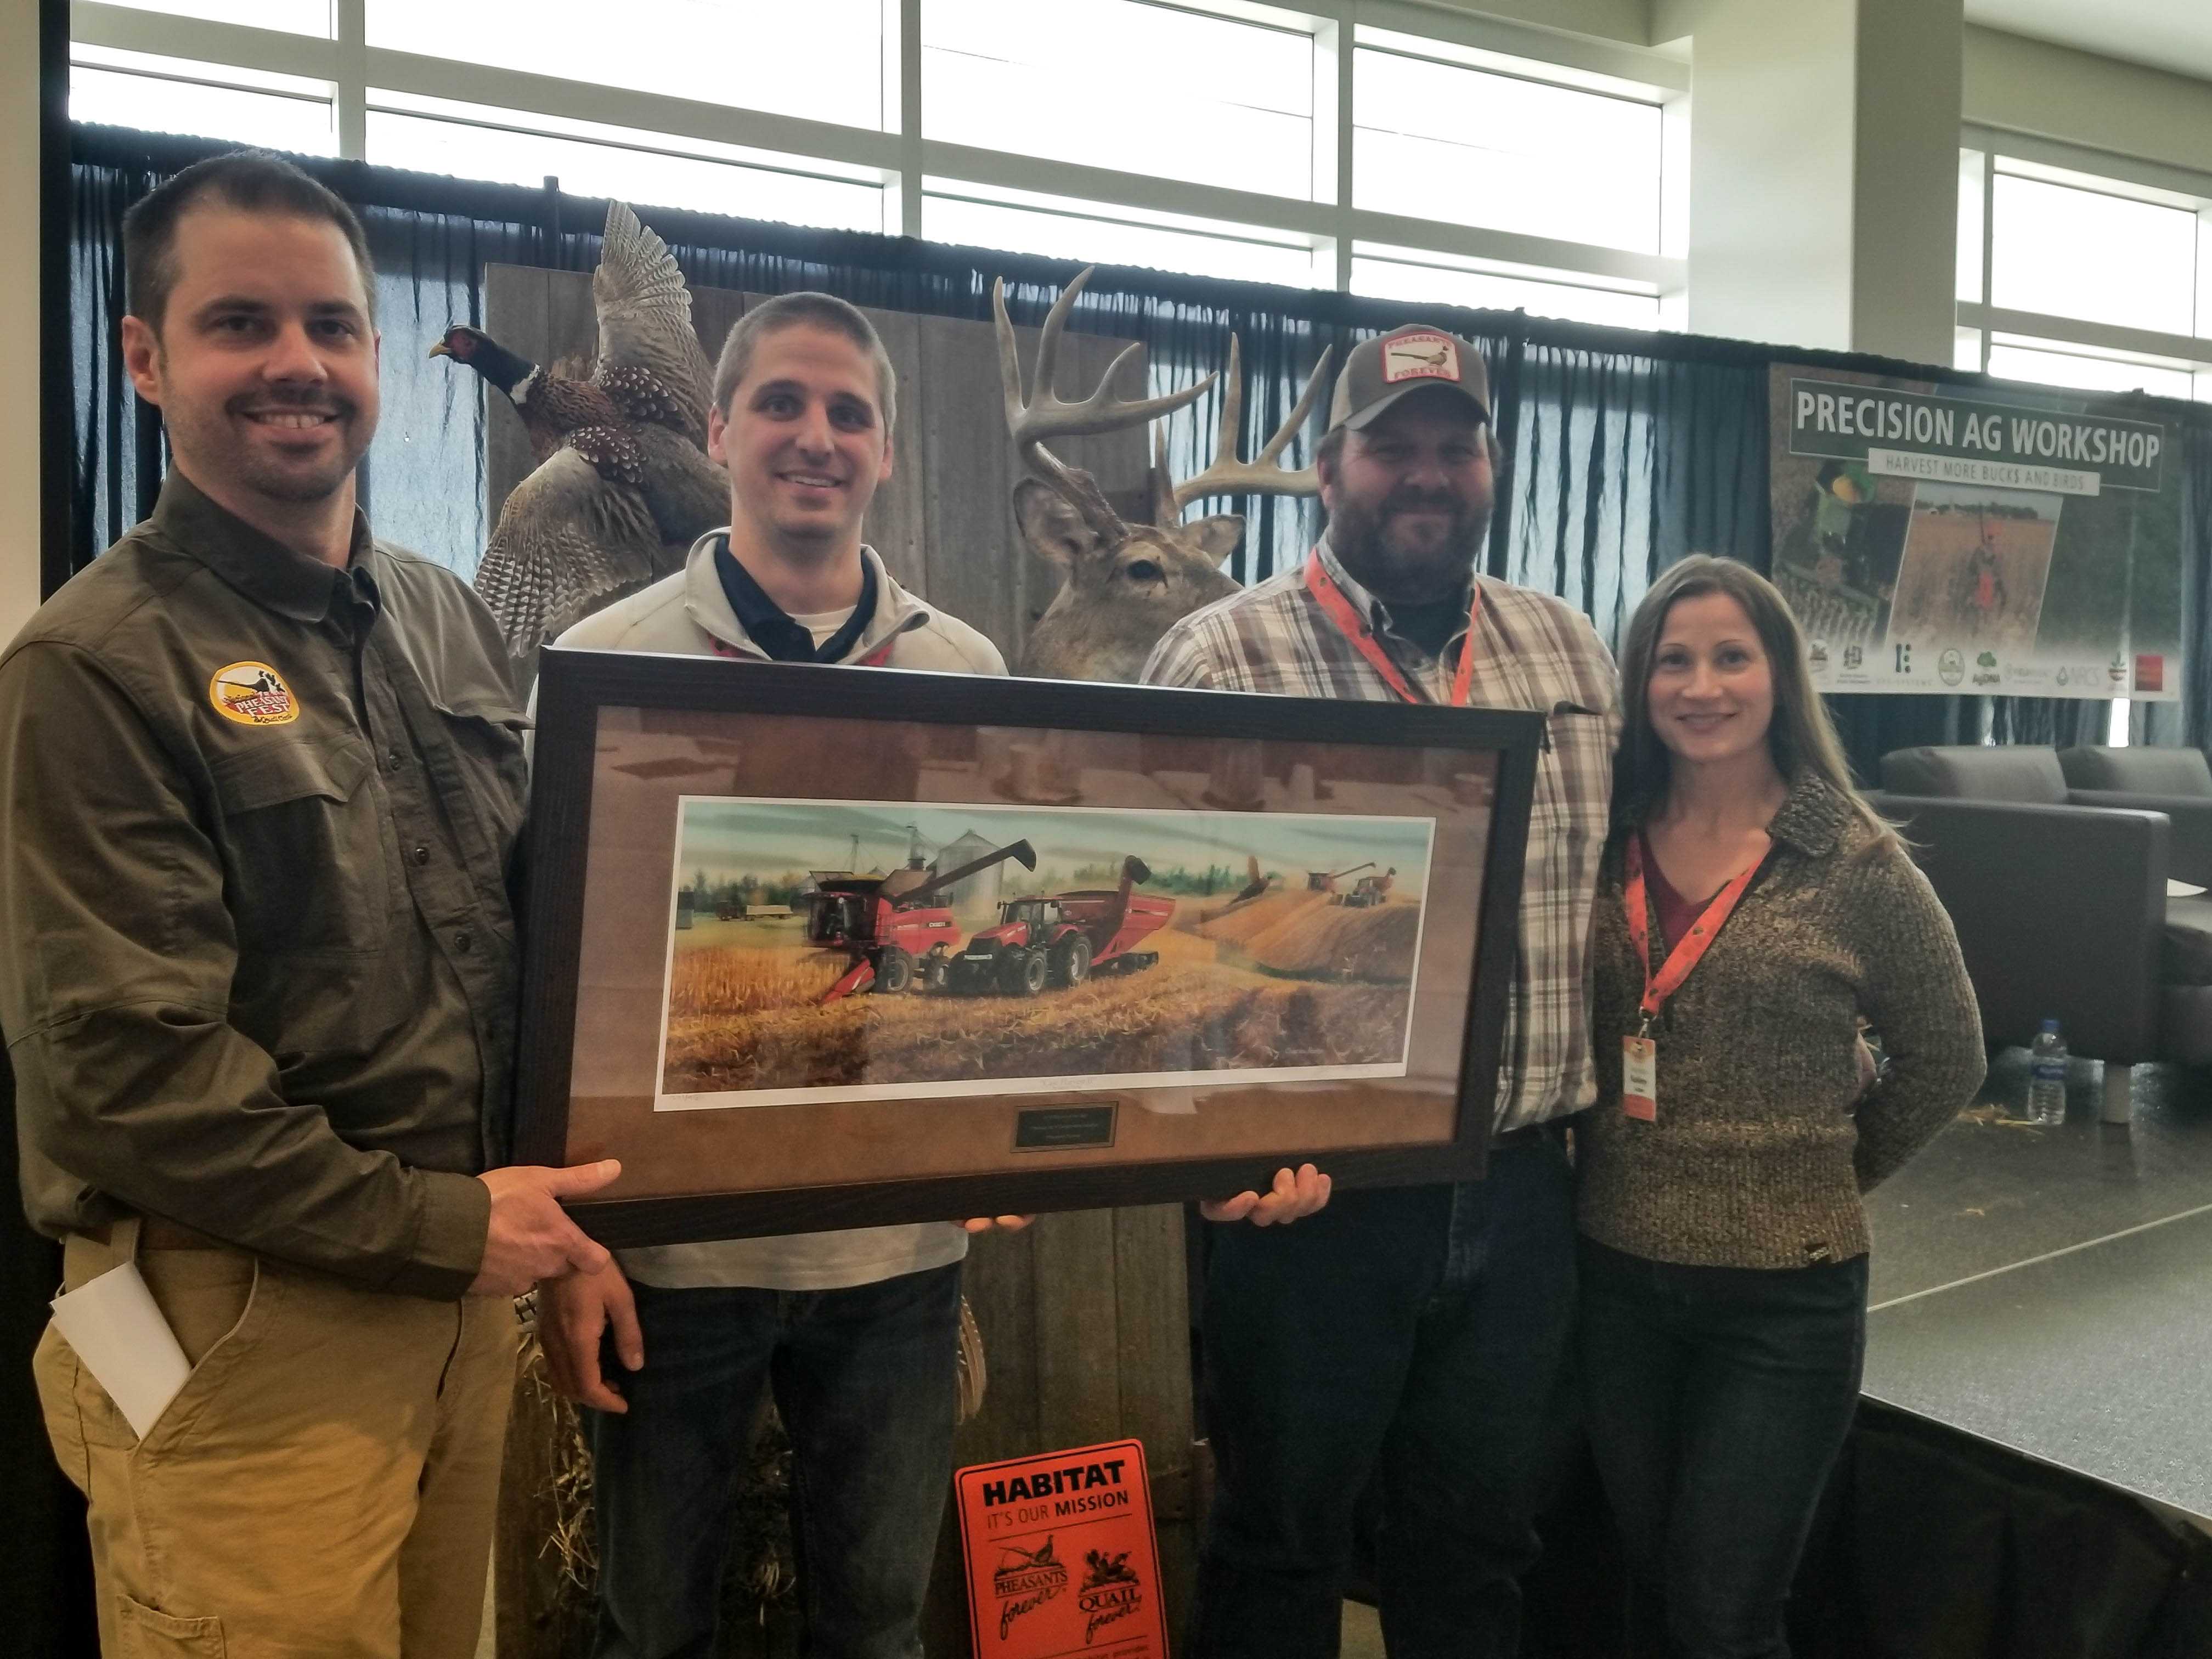 Jeff and Kelly Lake, at right, accept the Precision Ag Farmer of the Year Award from Pheasants Forever's Ryan Heiniger and Scott Stipetich, at left.